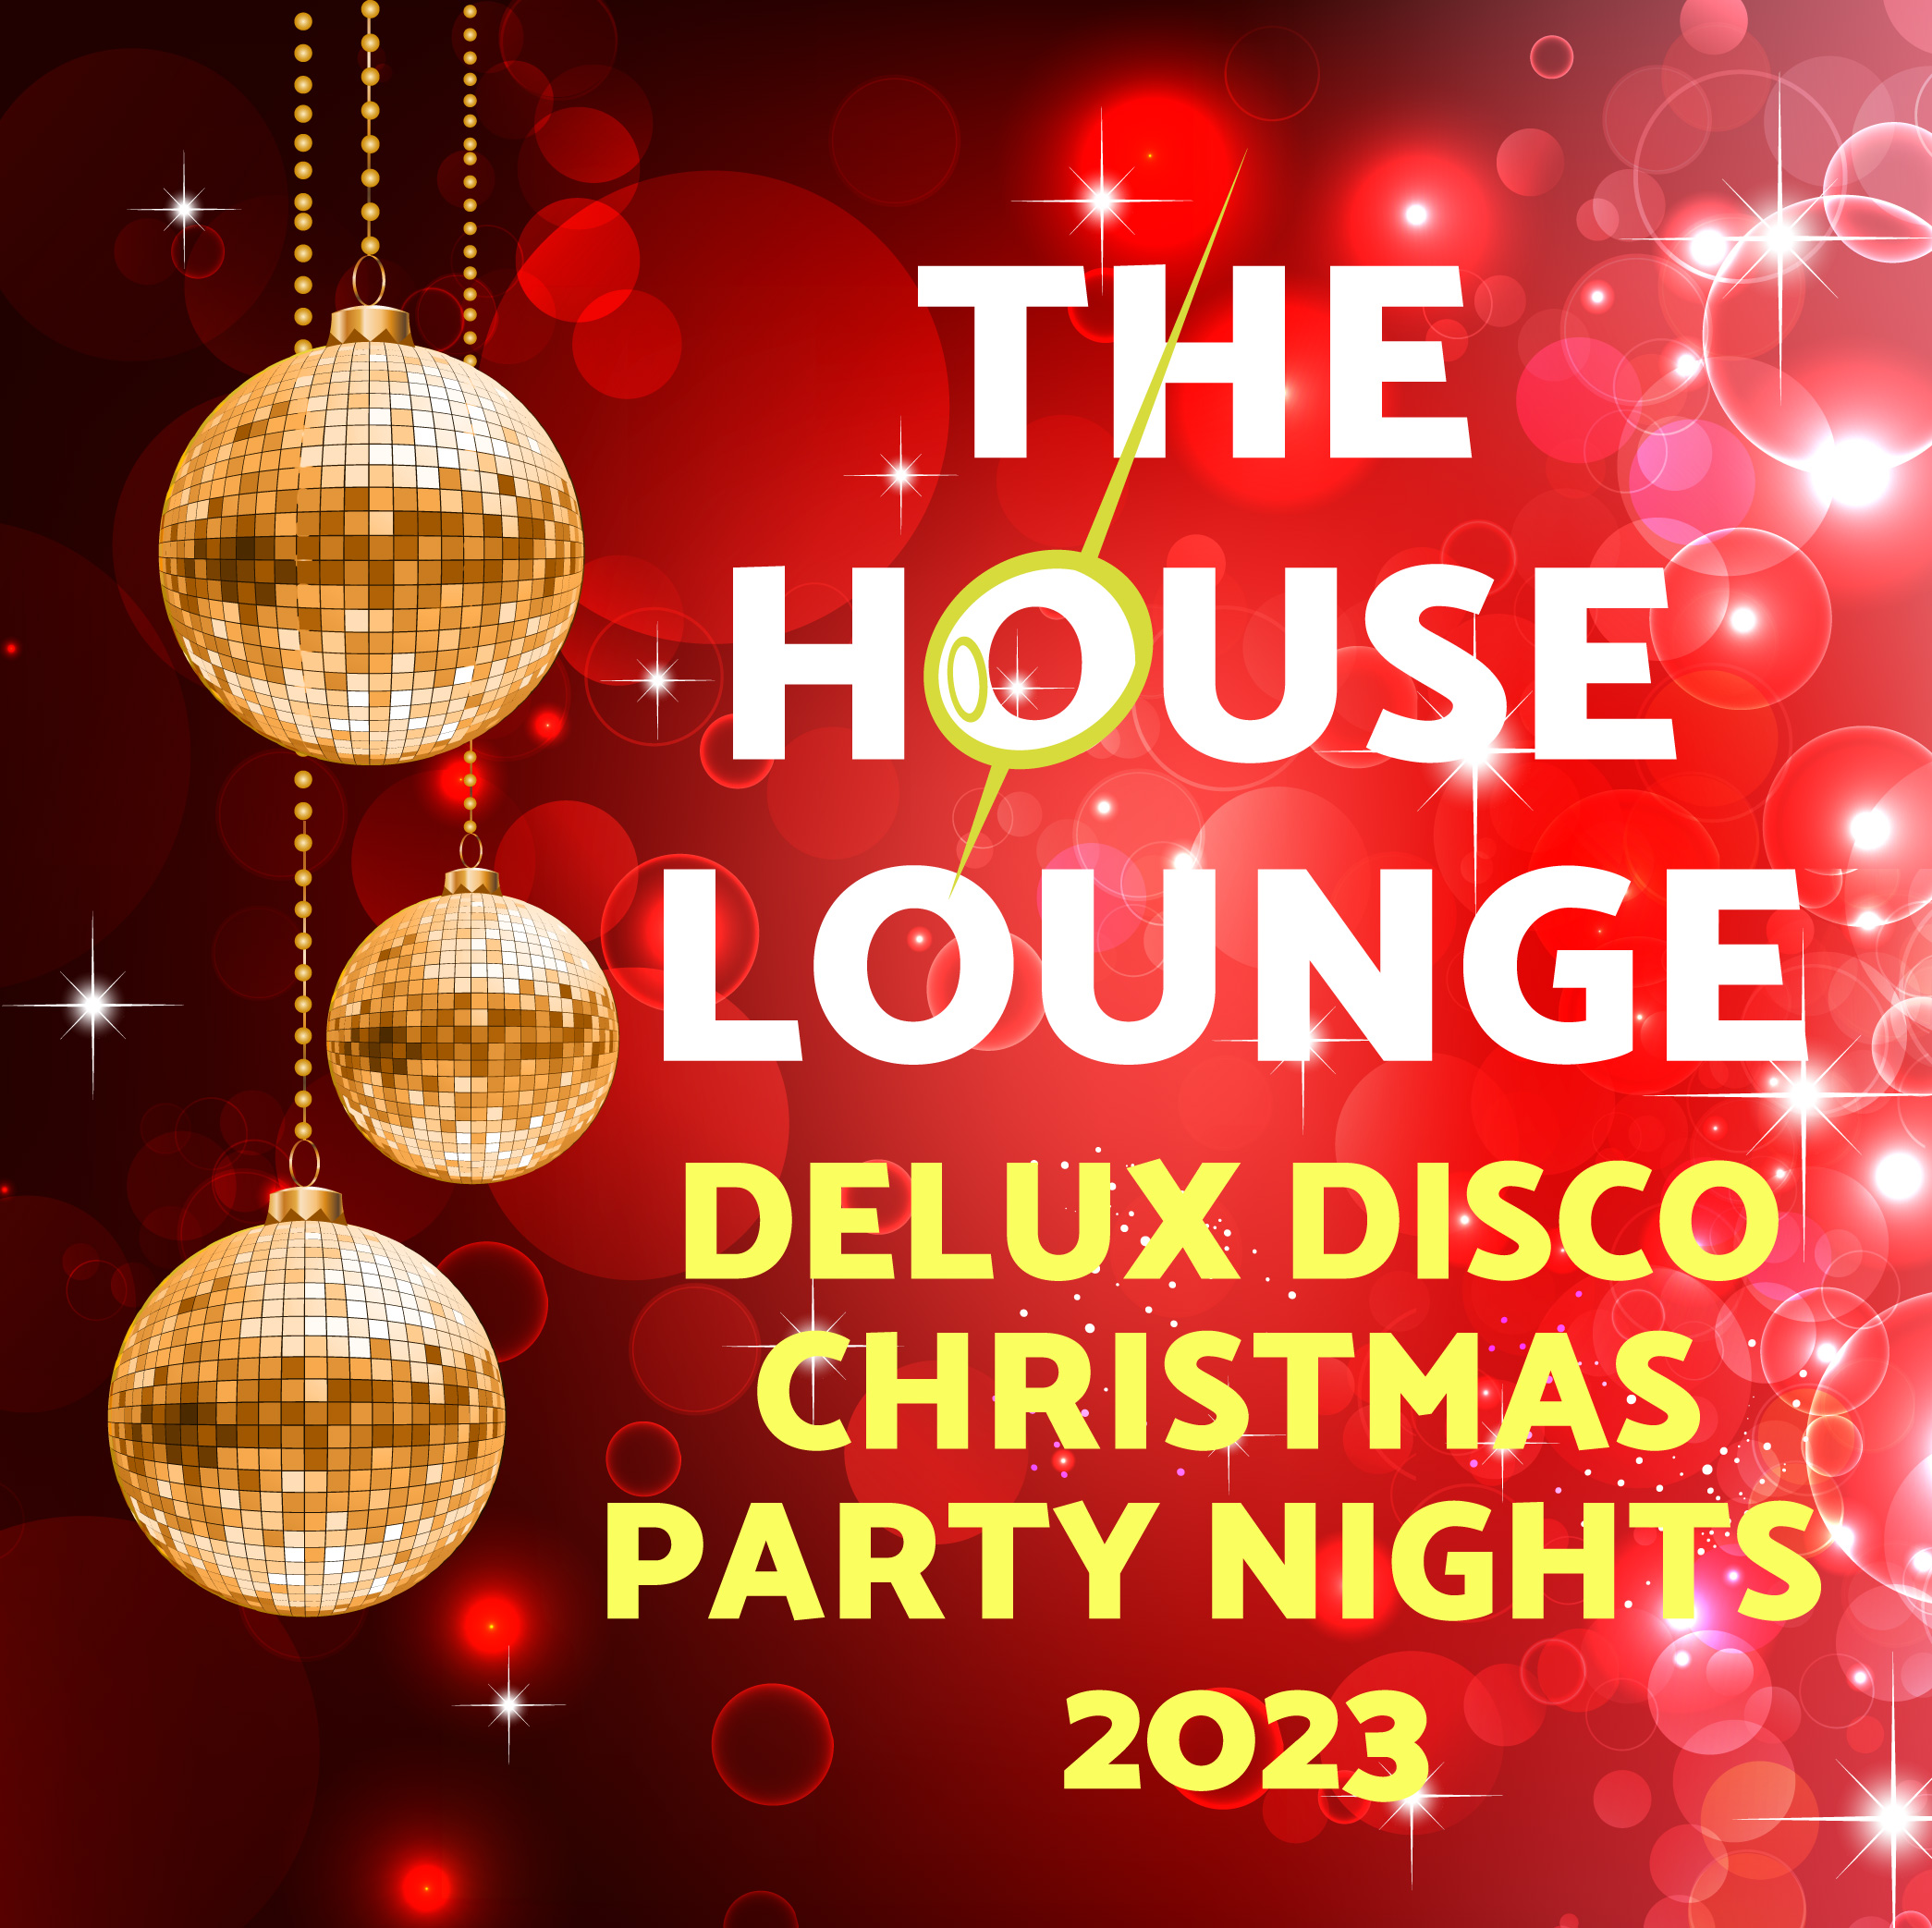 The House Lounge: Delux Disco Christmas Party Nights 2023!